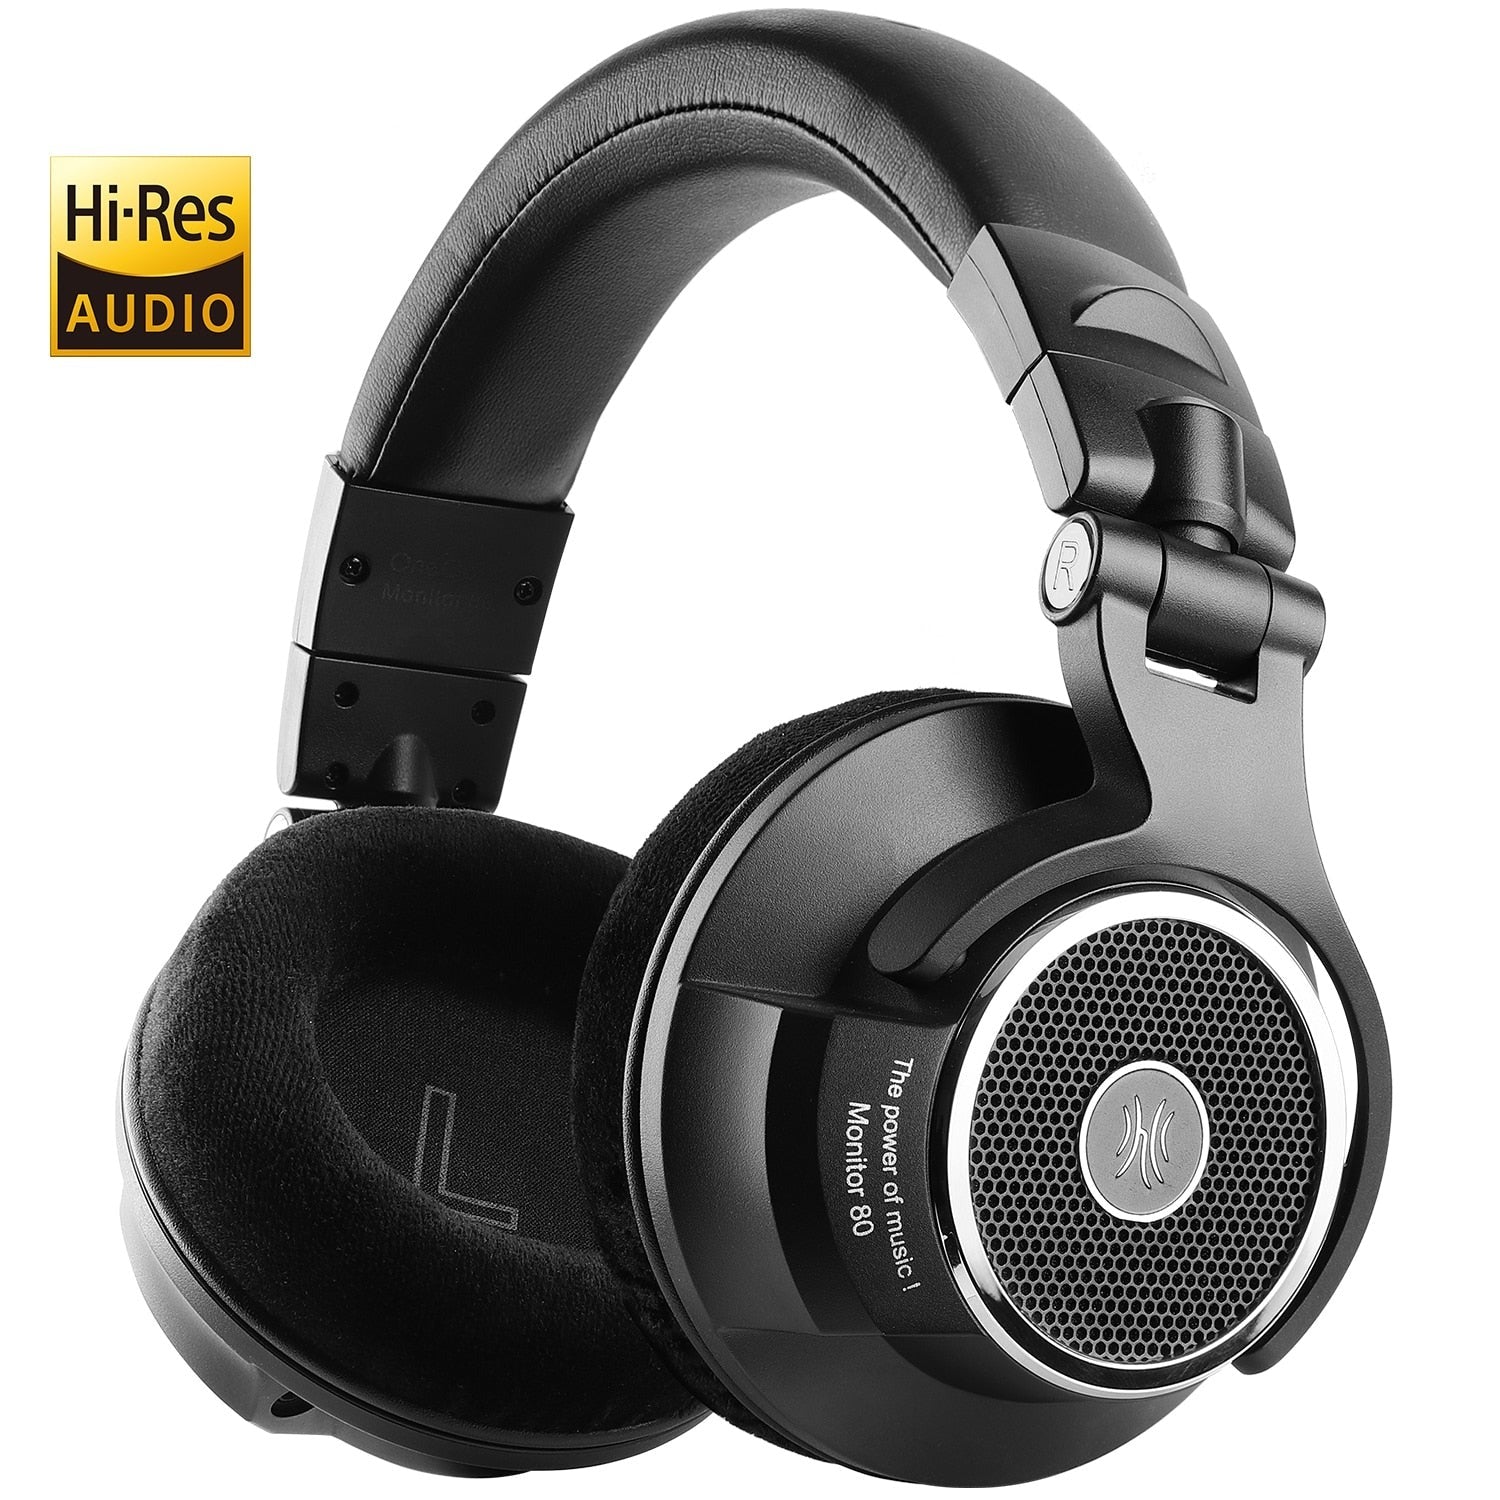 Monitor 80 Open Back Wired Headphones With Hi-Res Audio for Professional DJ Studio | Hifi Media Store